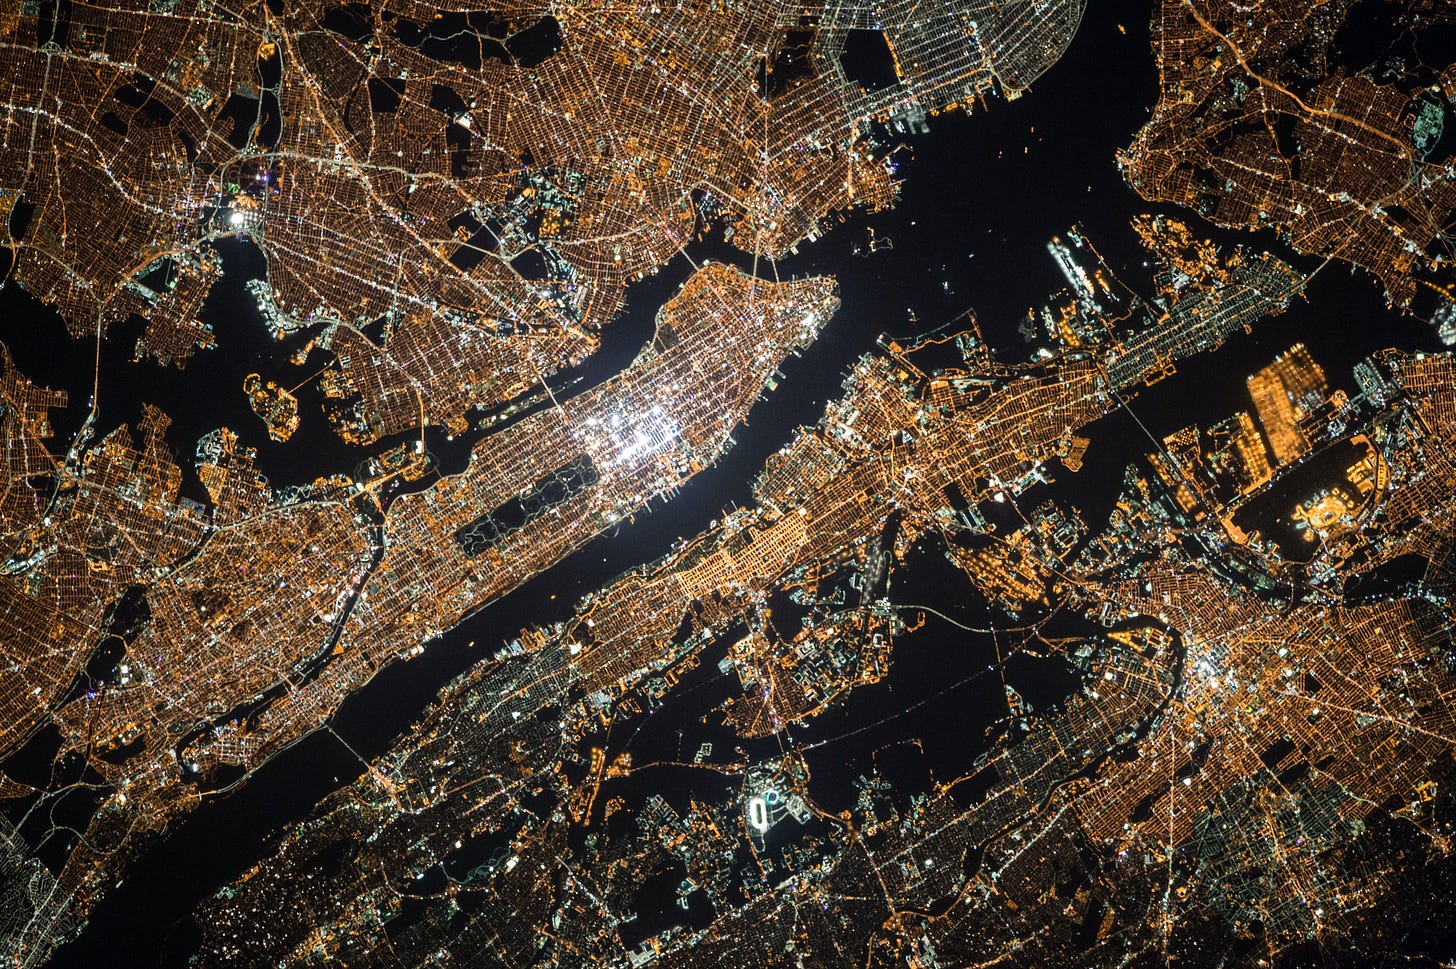 An aerial view of Manhattan at night, the city lights bright and crowded against the darkness of the rivers.